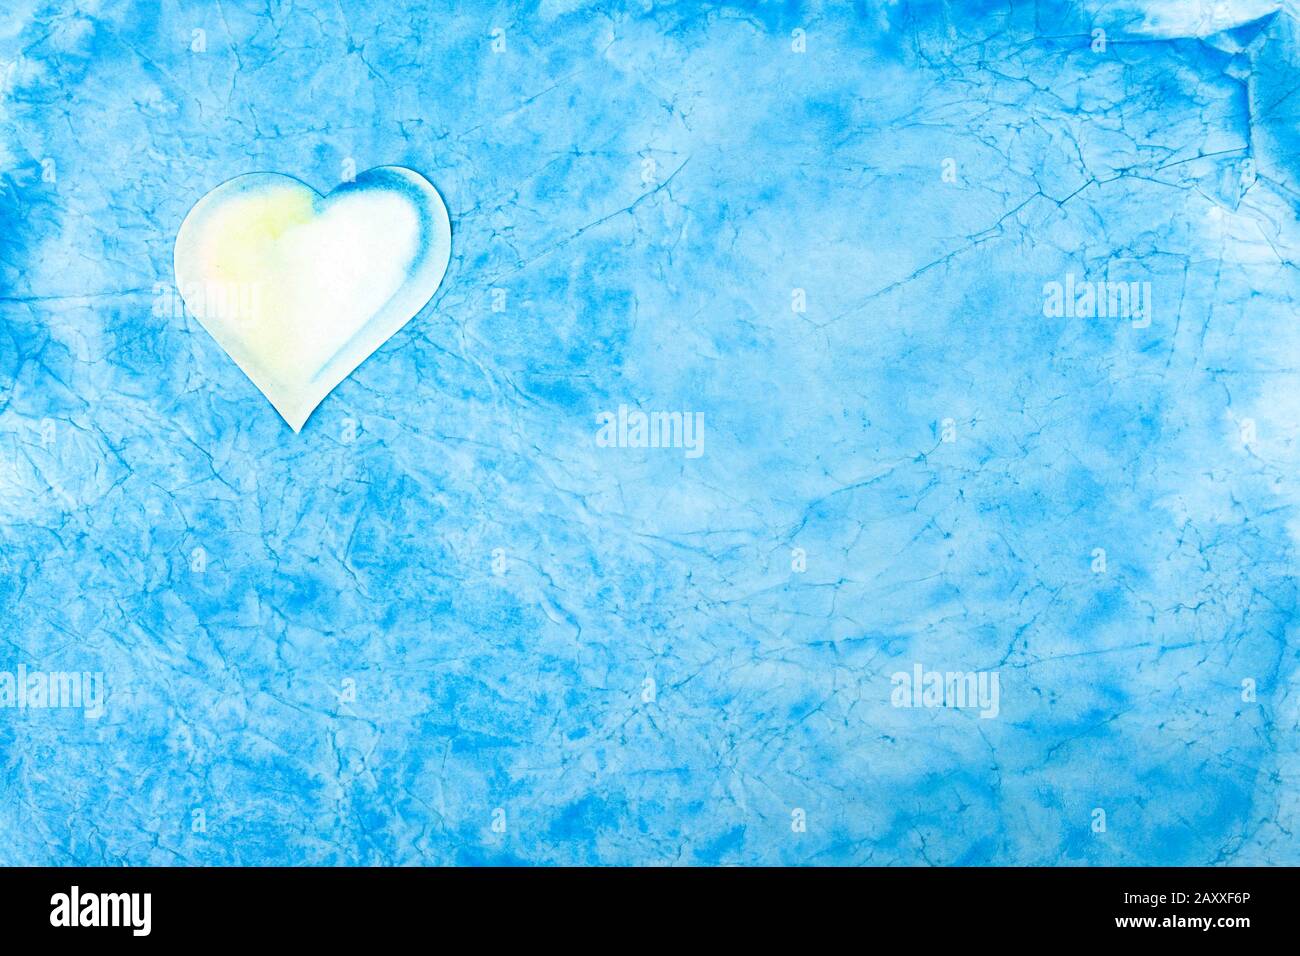 Simple light blue abstract cloud like background texture with a small white heart in the corner. Calm serene wallpaper, greetings card, postcard Stock Photo